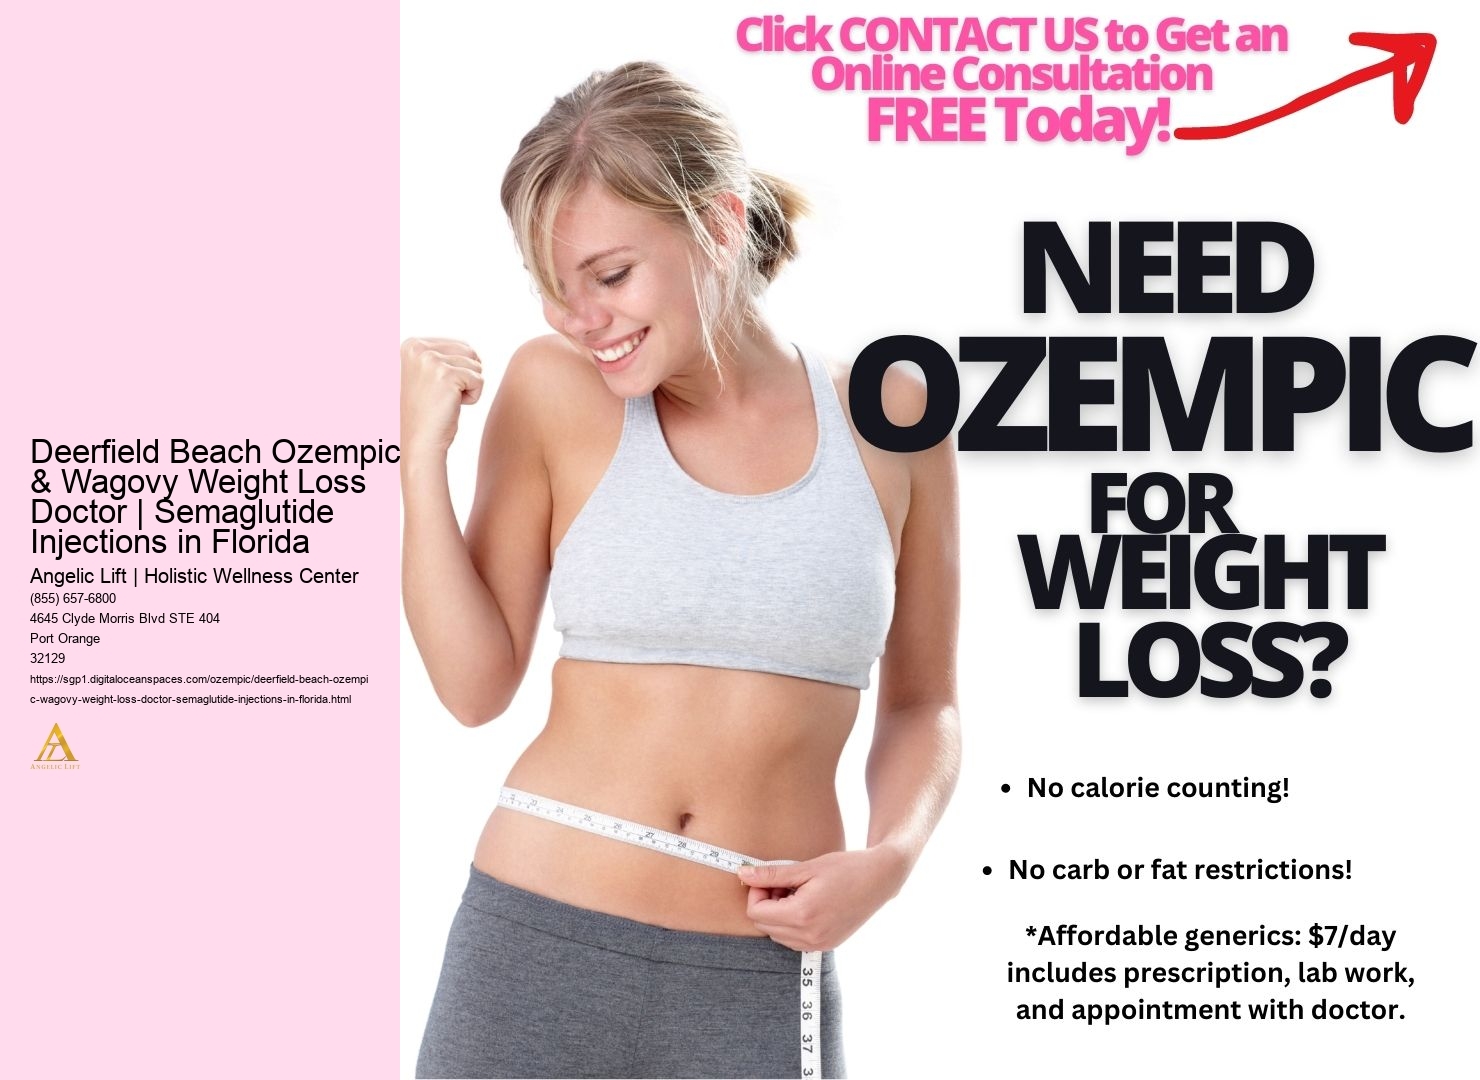 Deerfield Beach Ozempic & Wagovy Weight Loss Doctor | Semaglutide Injections in Florida